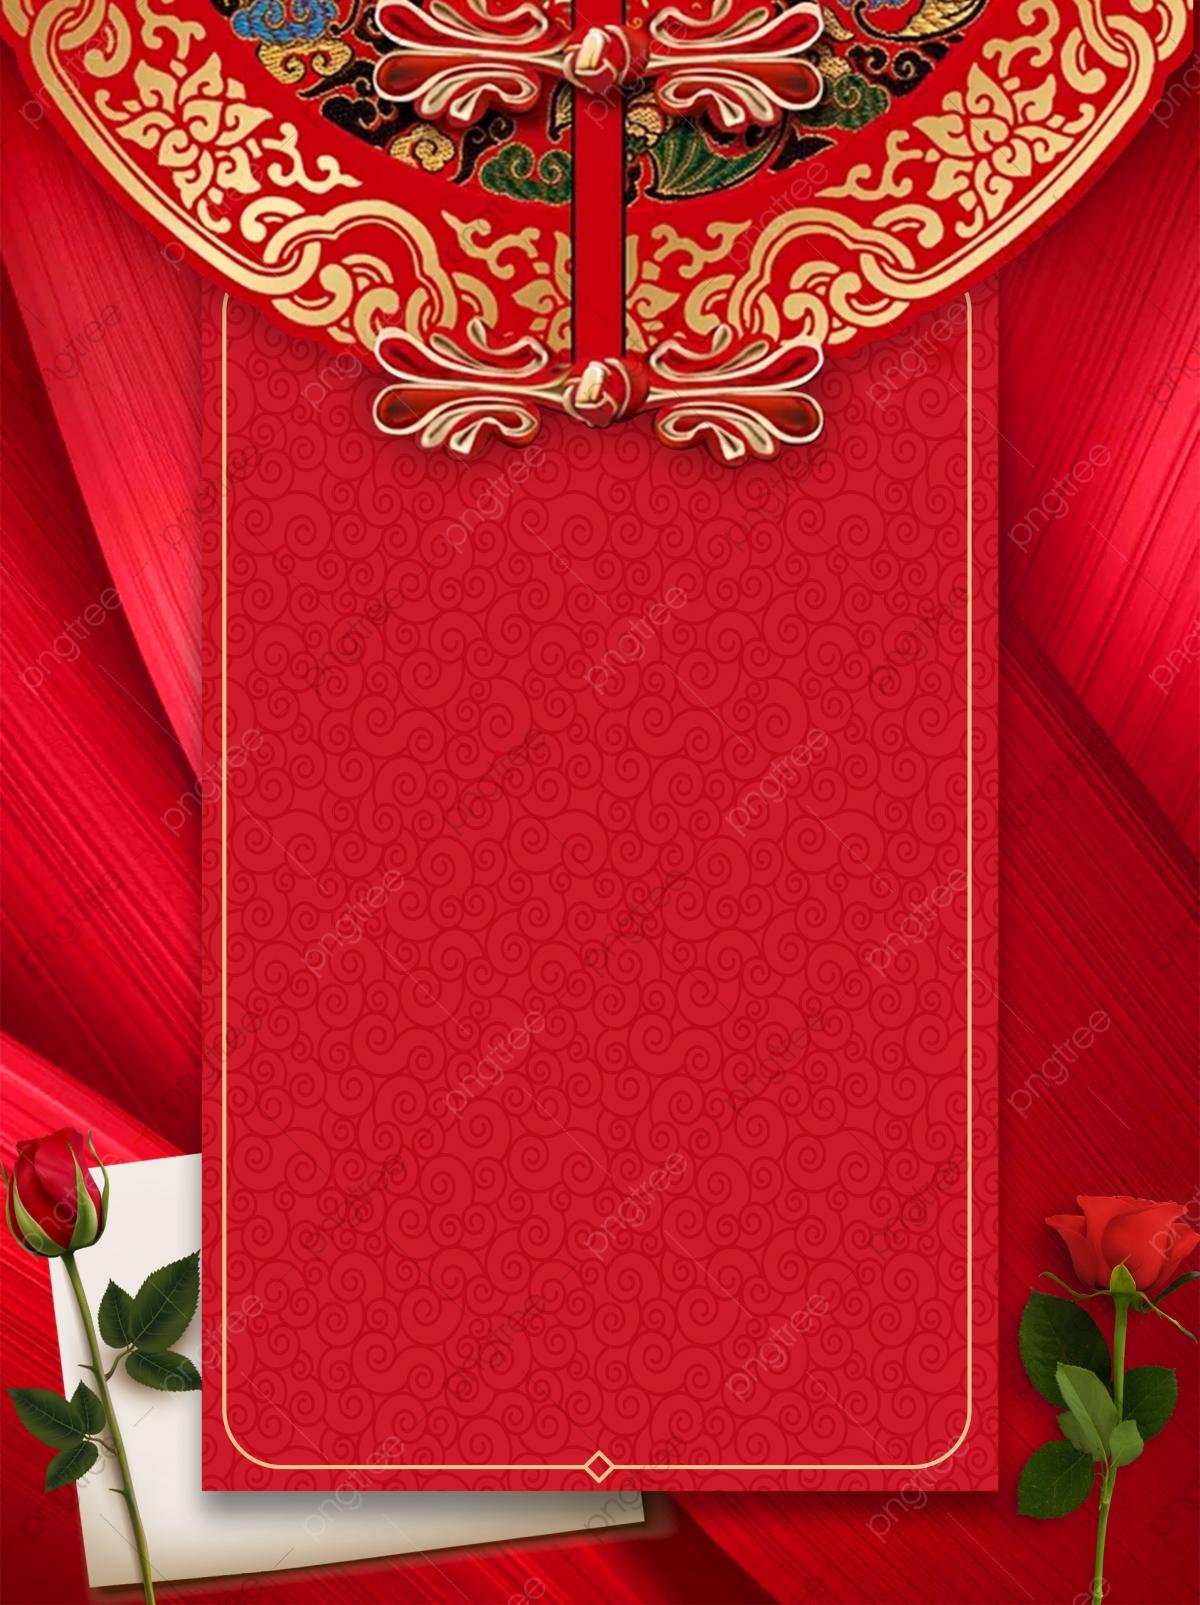 Wedding Card Wallpapers - Top Free Wedding Card Backgrounds